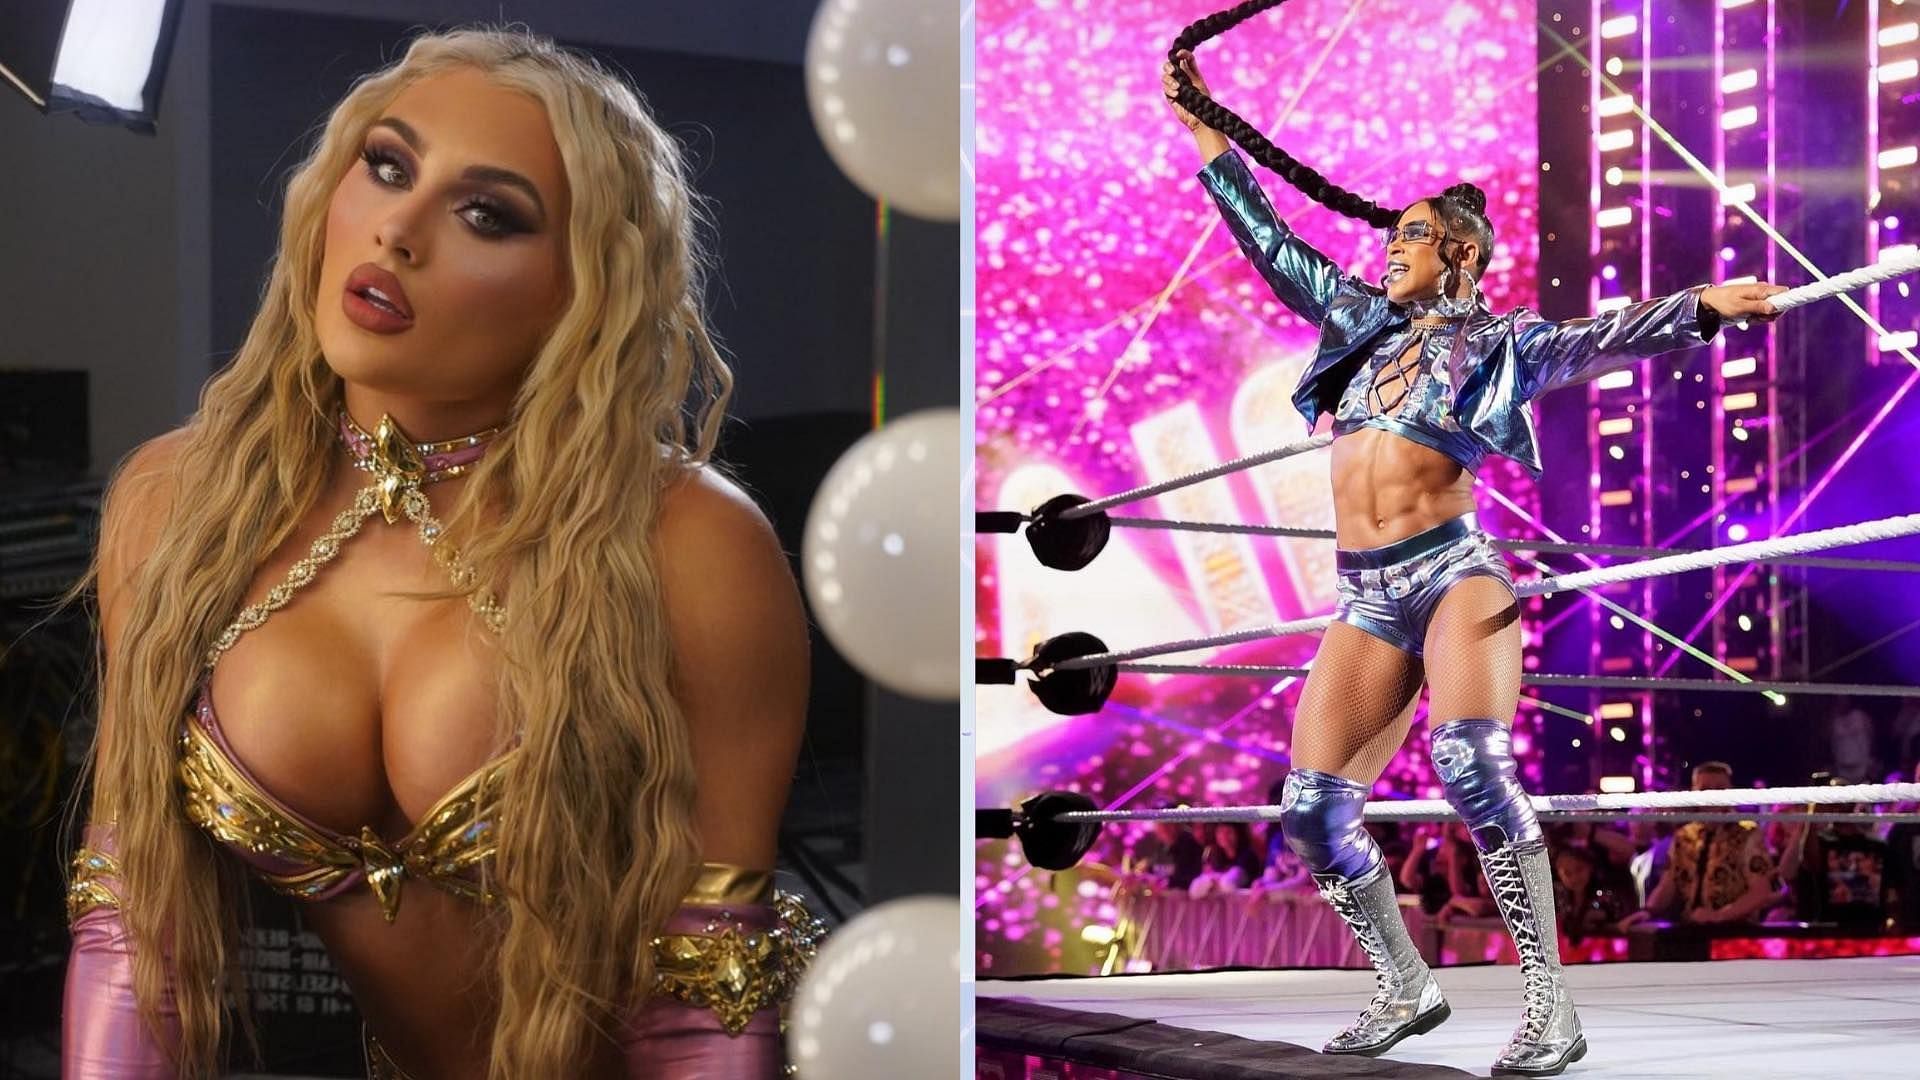 Tiffany Stratton will clash with Bianca Belair on WWE SmackDown